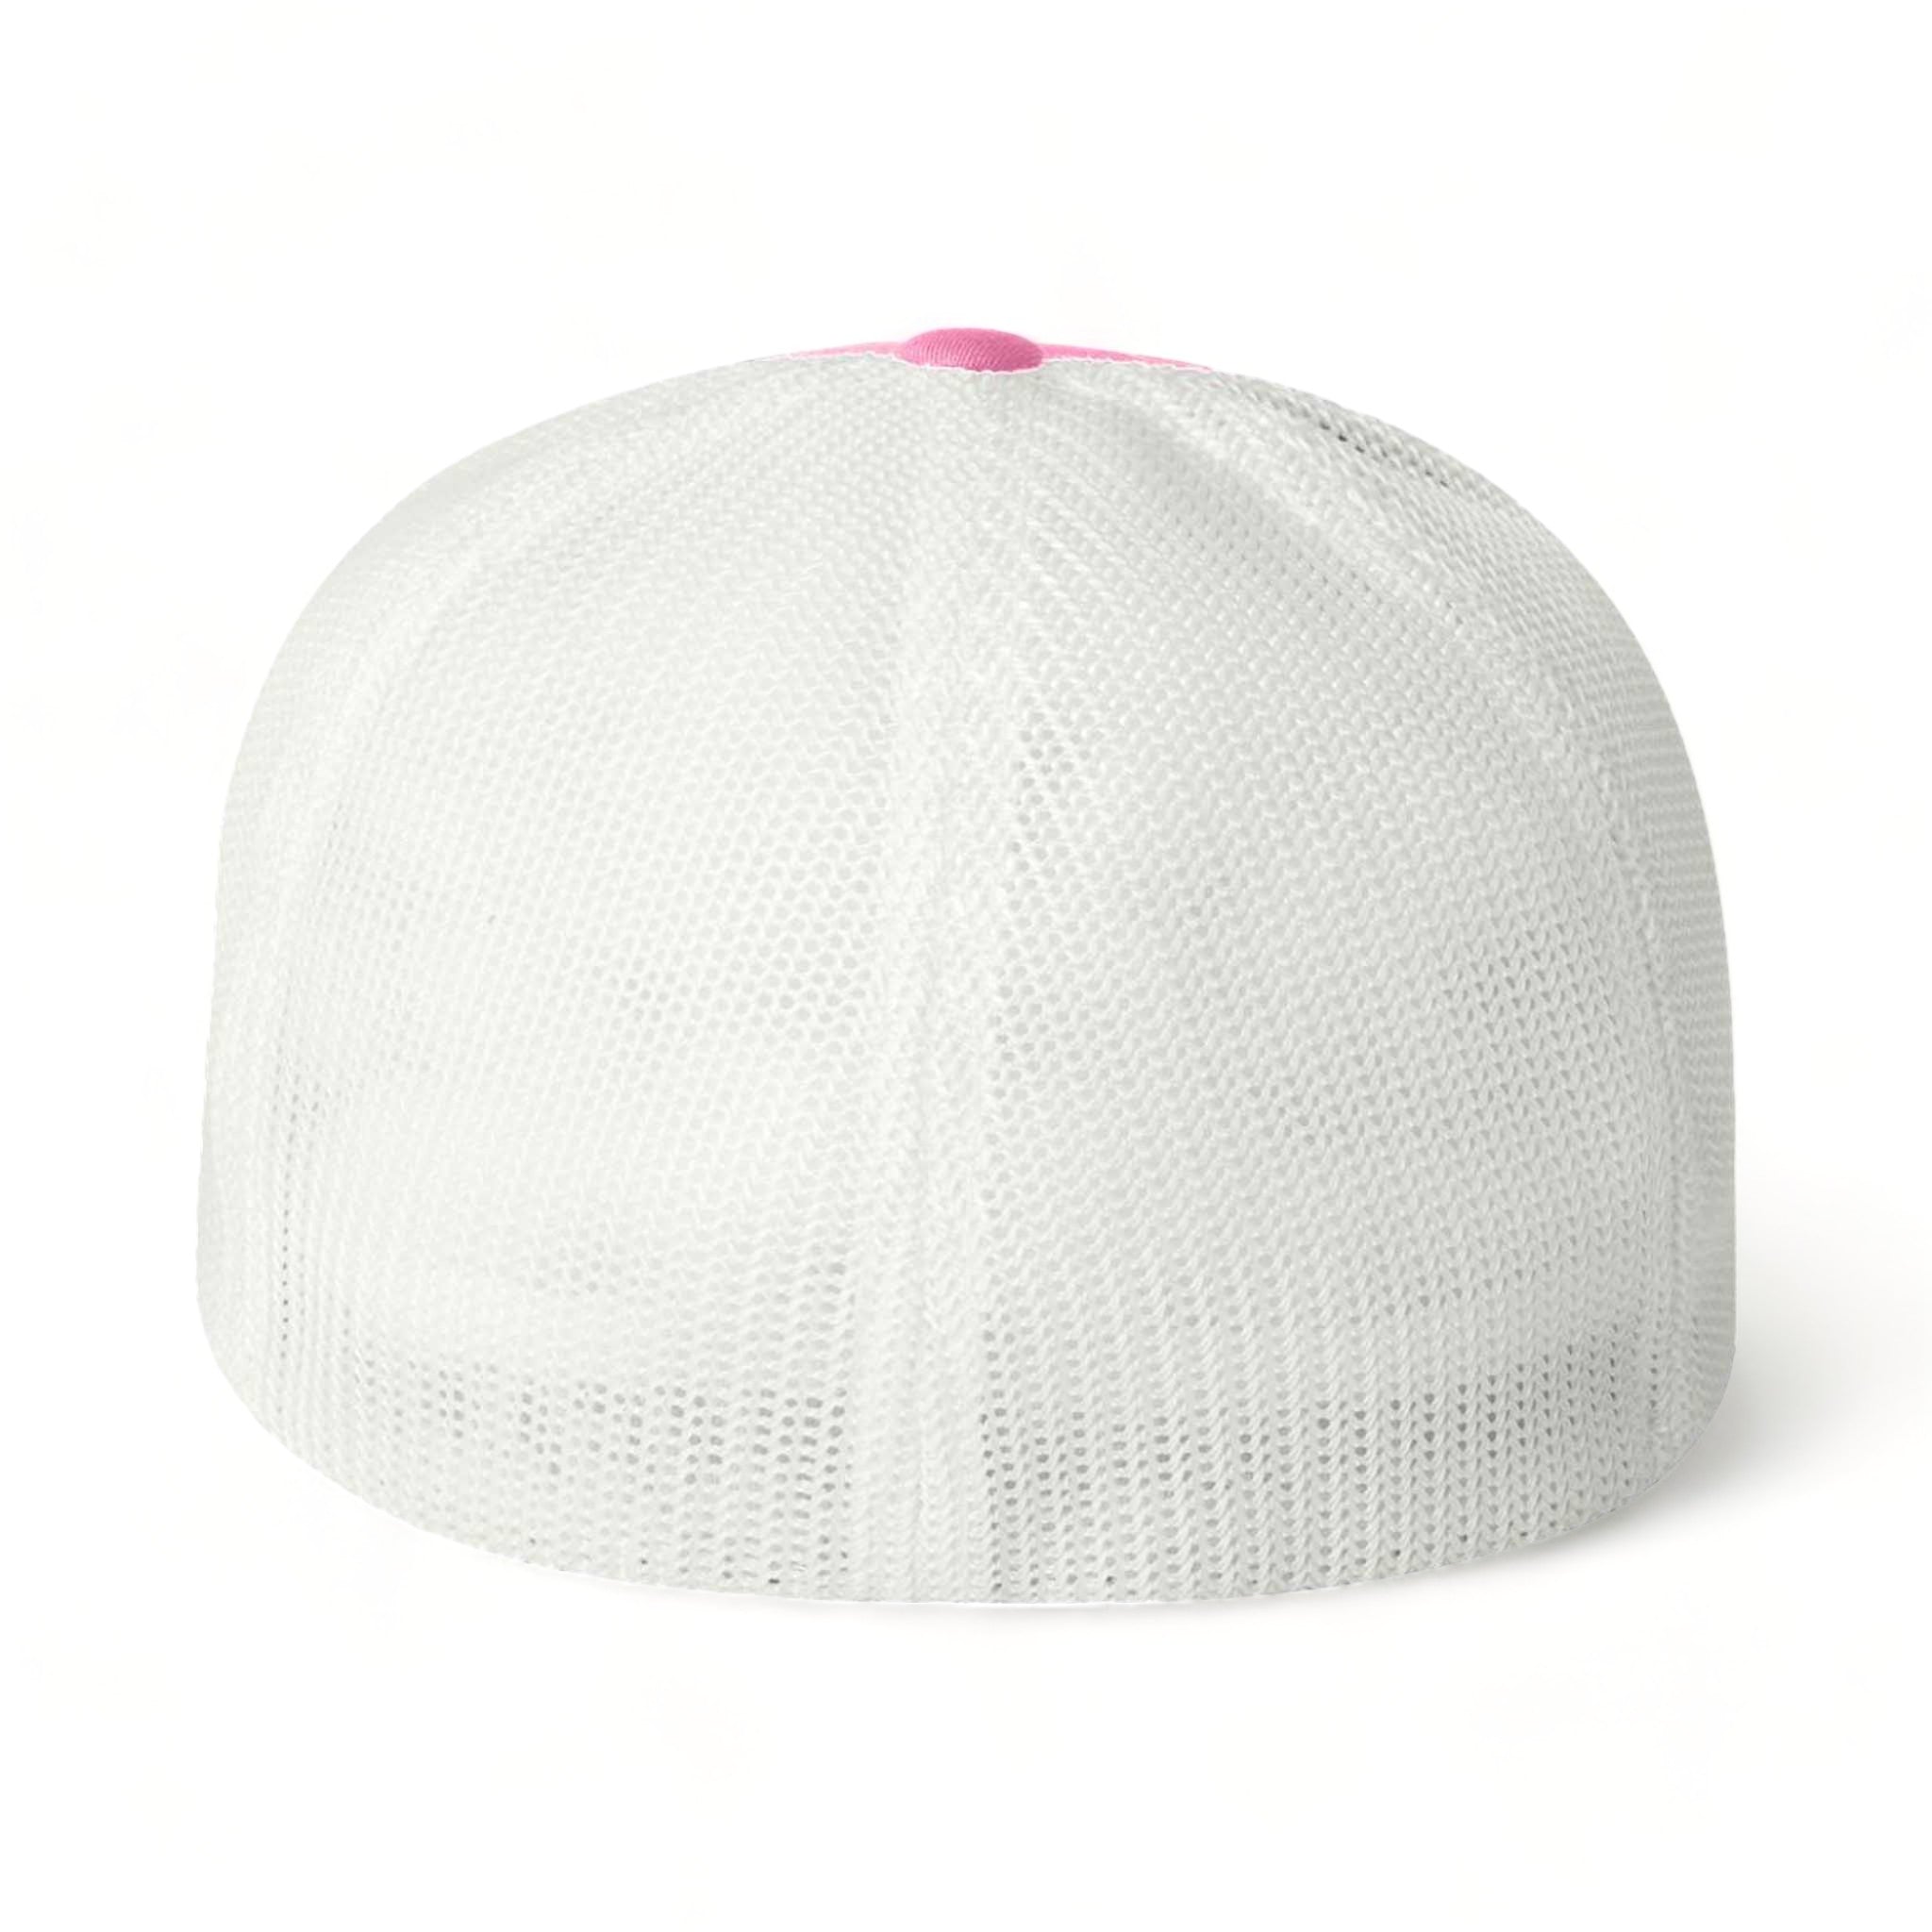 Back view of Flexfit 6511 custom hat in pink and white